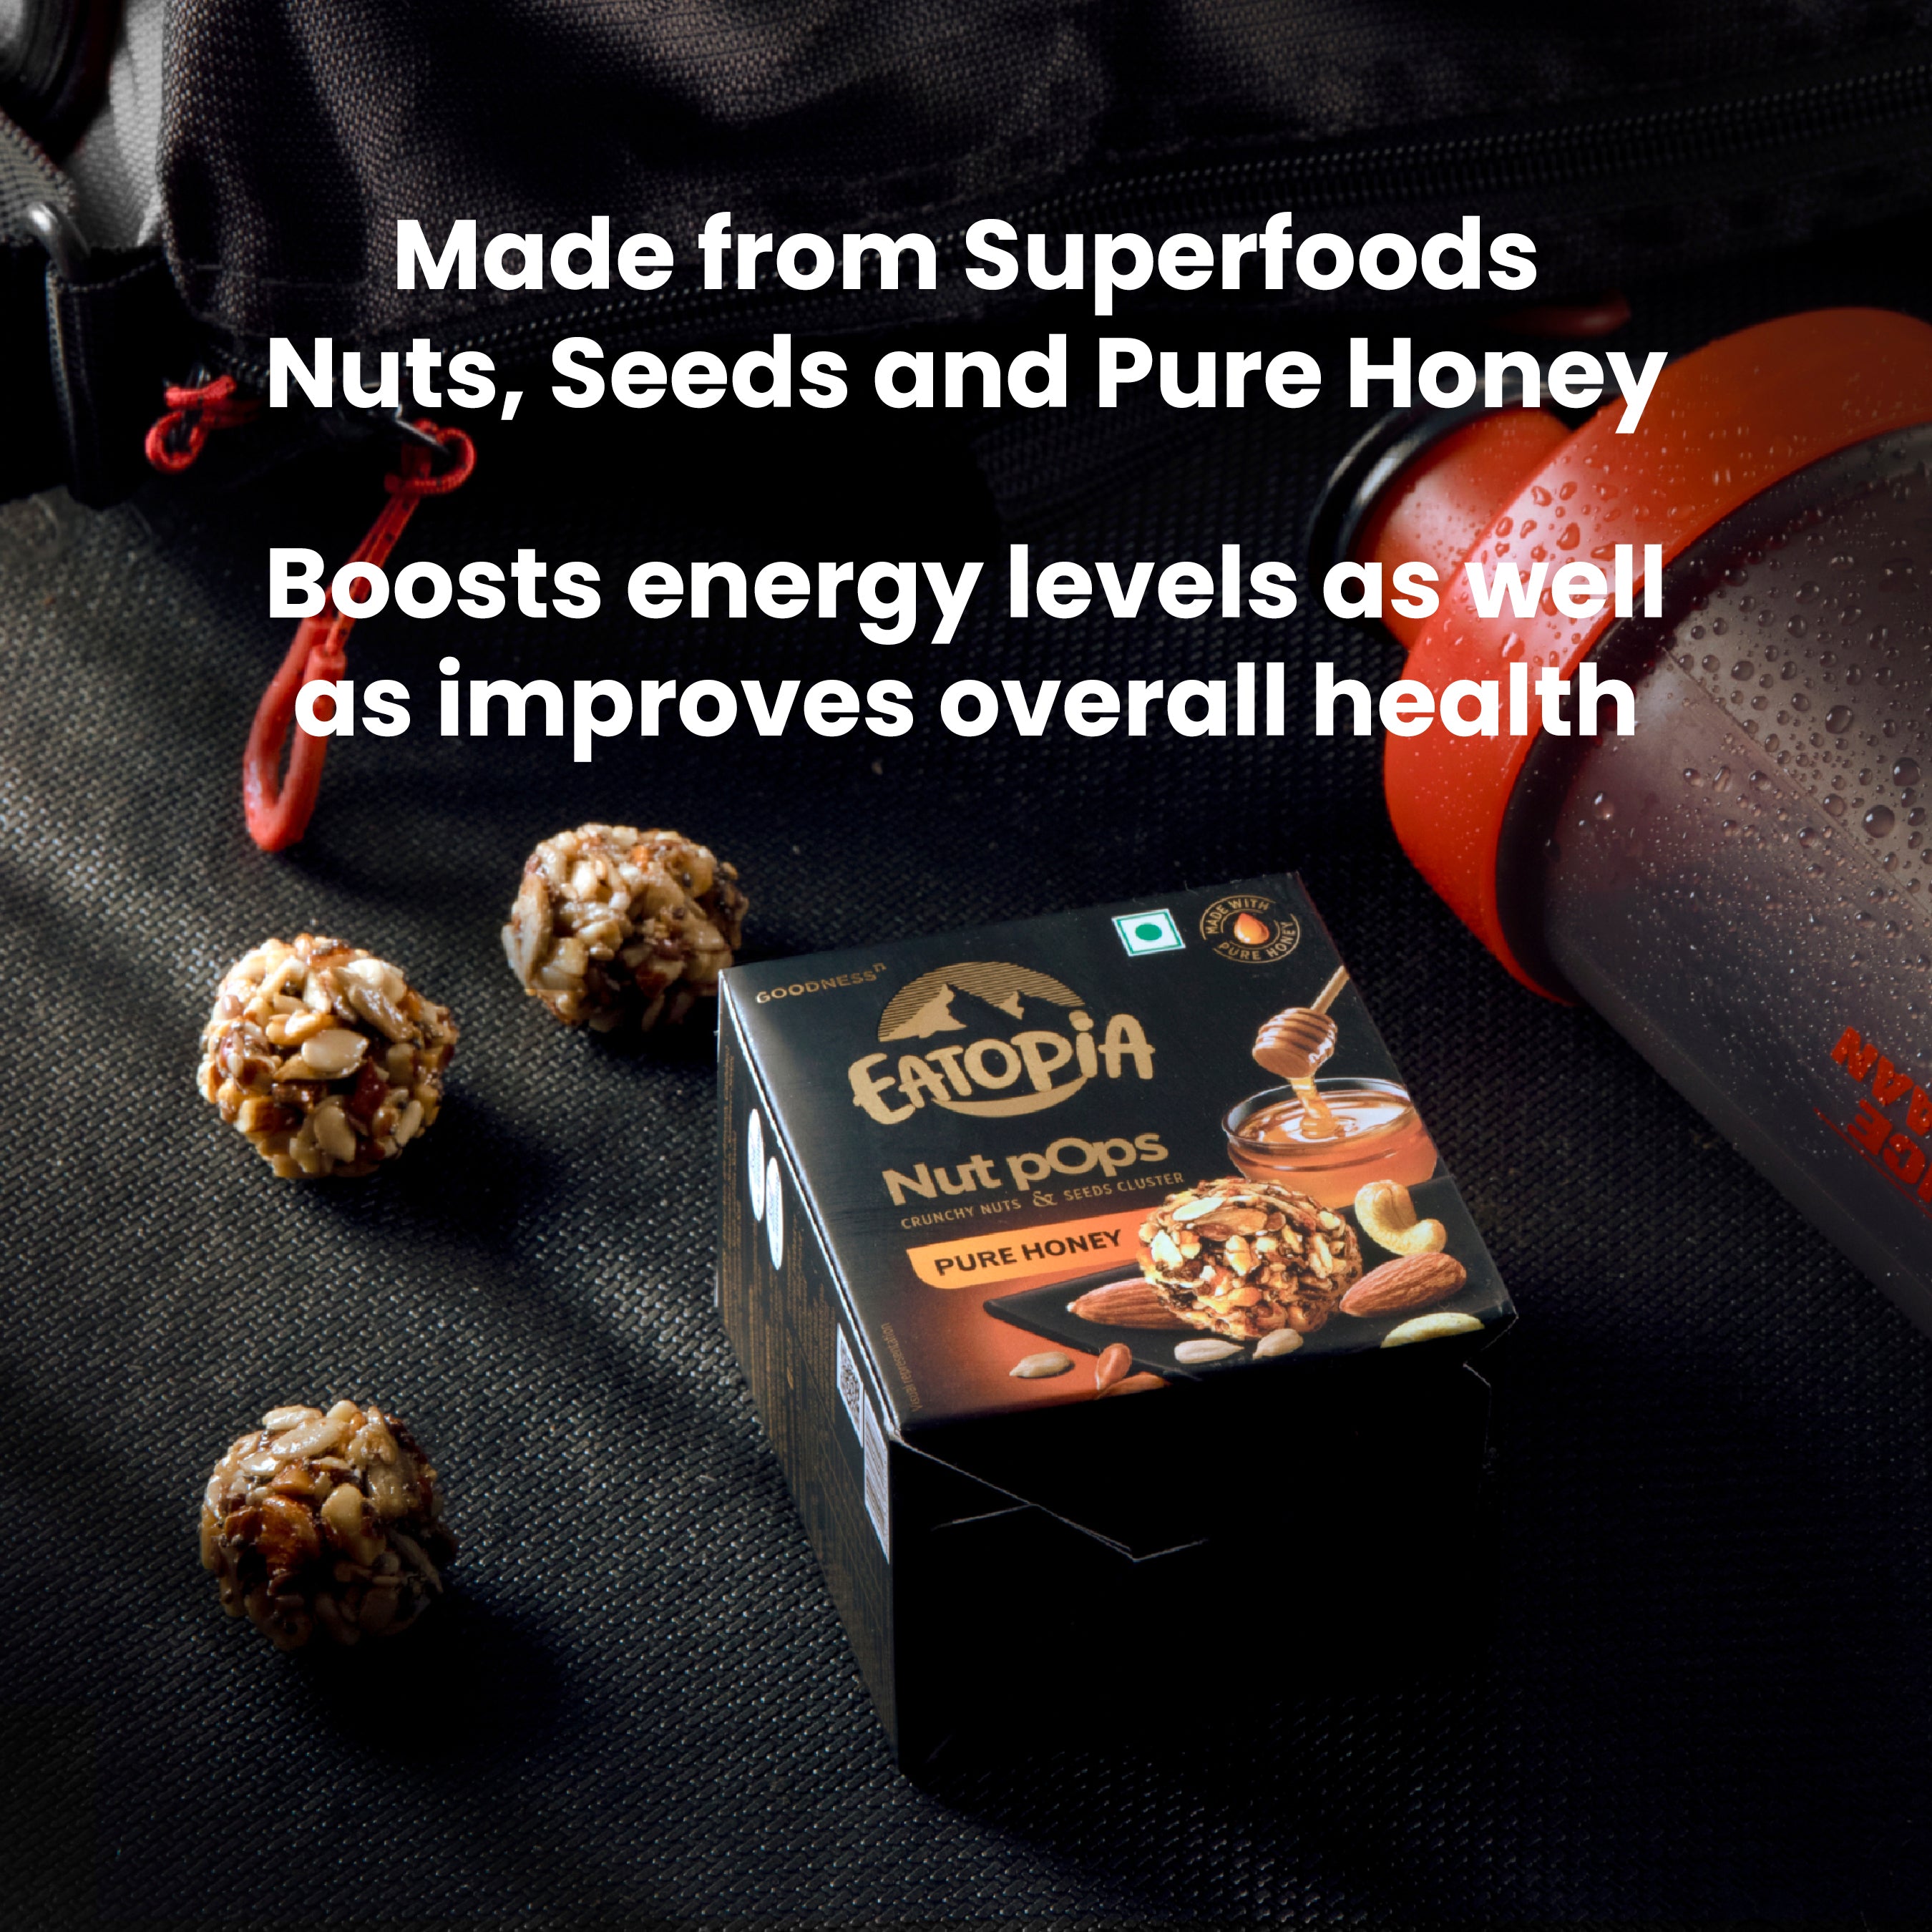 Eatopia Nut Pops Almonds, Cashewnuts, 5 Seeds Energy Balls, Pure Honey | Pack of 2 | 100gm each